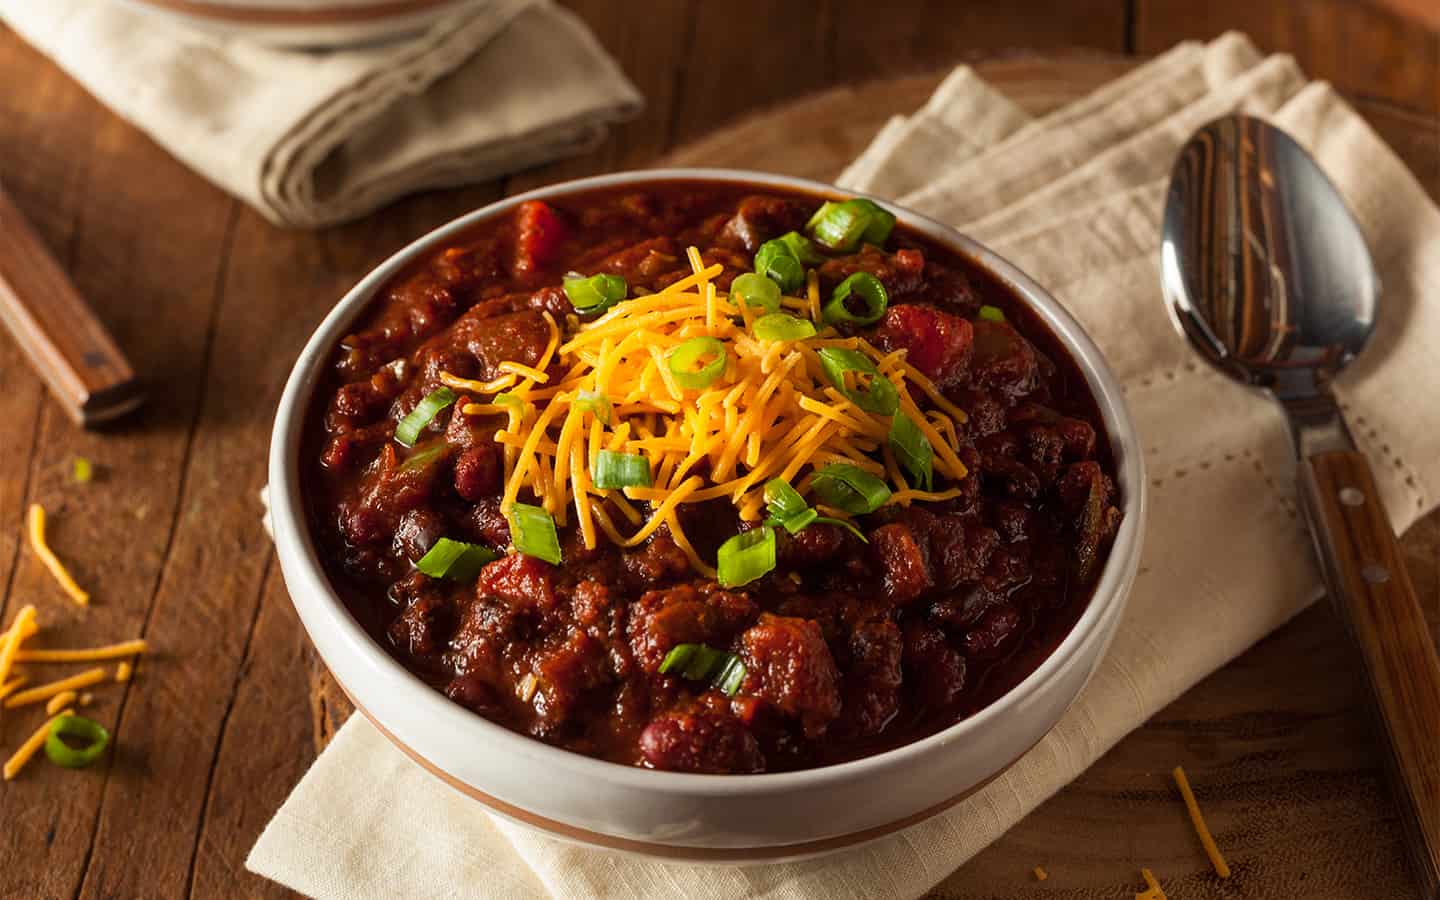 Taking the chill off by putting on some chili